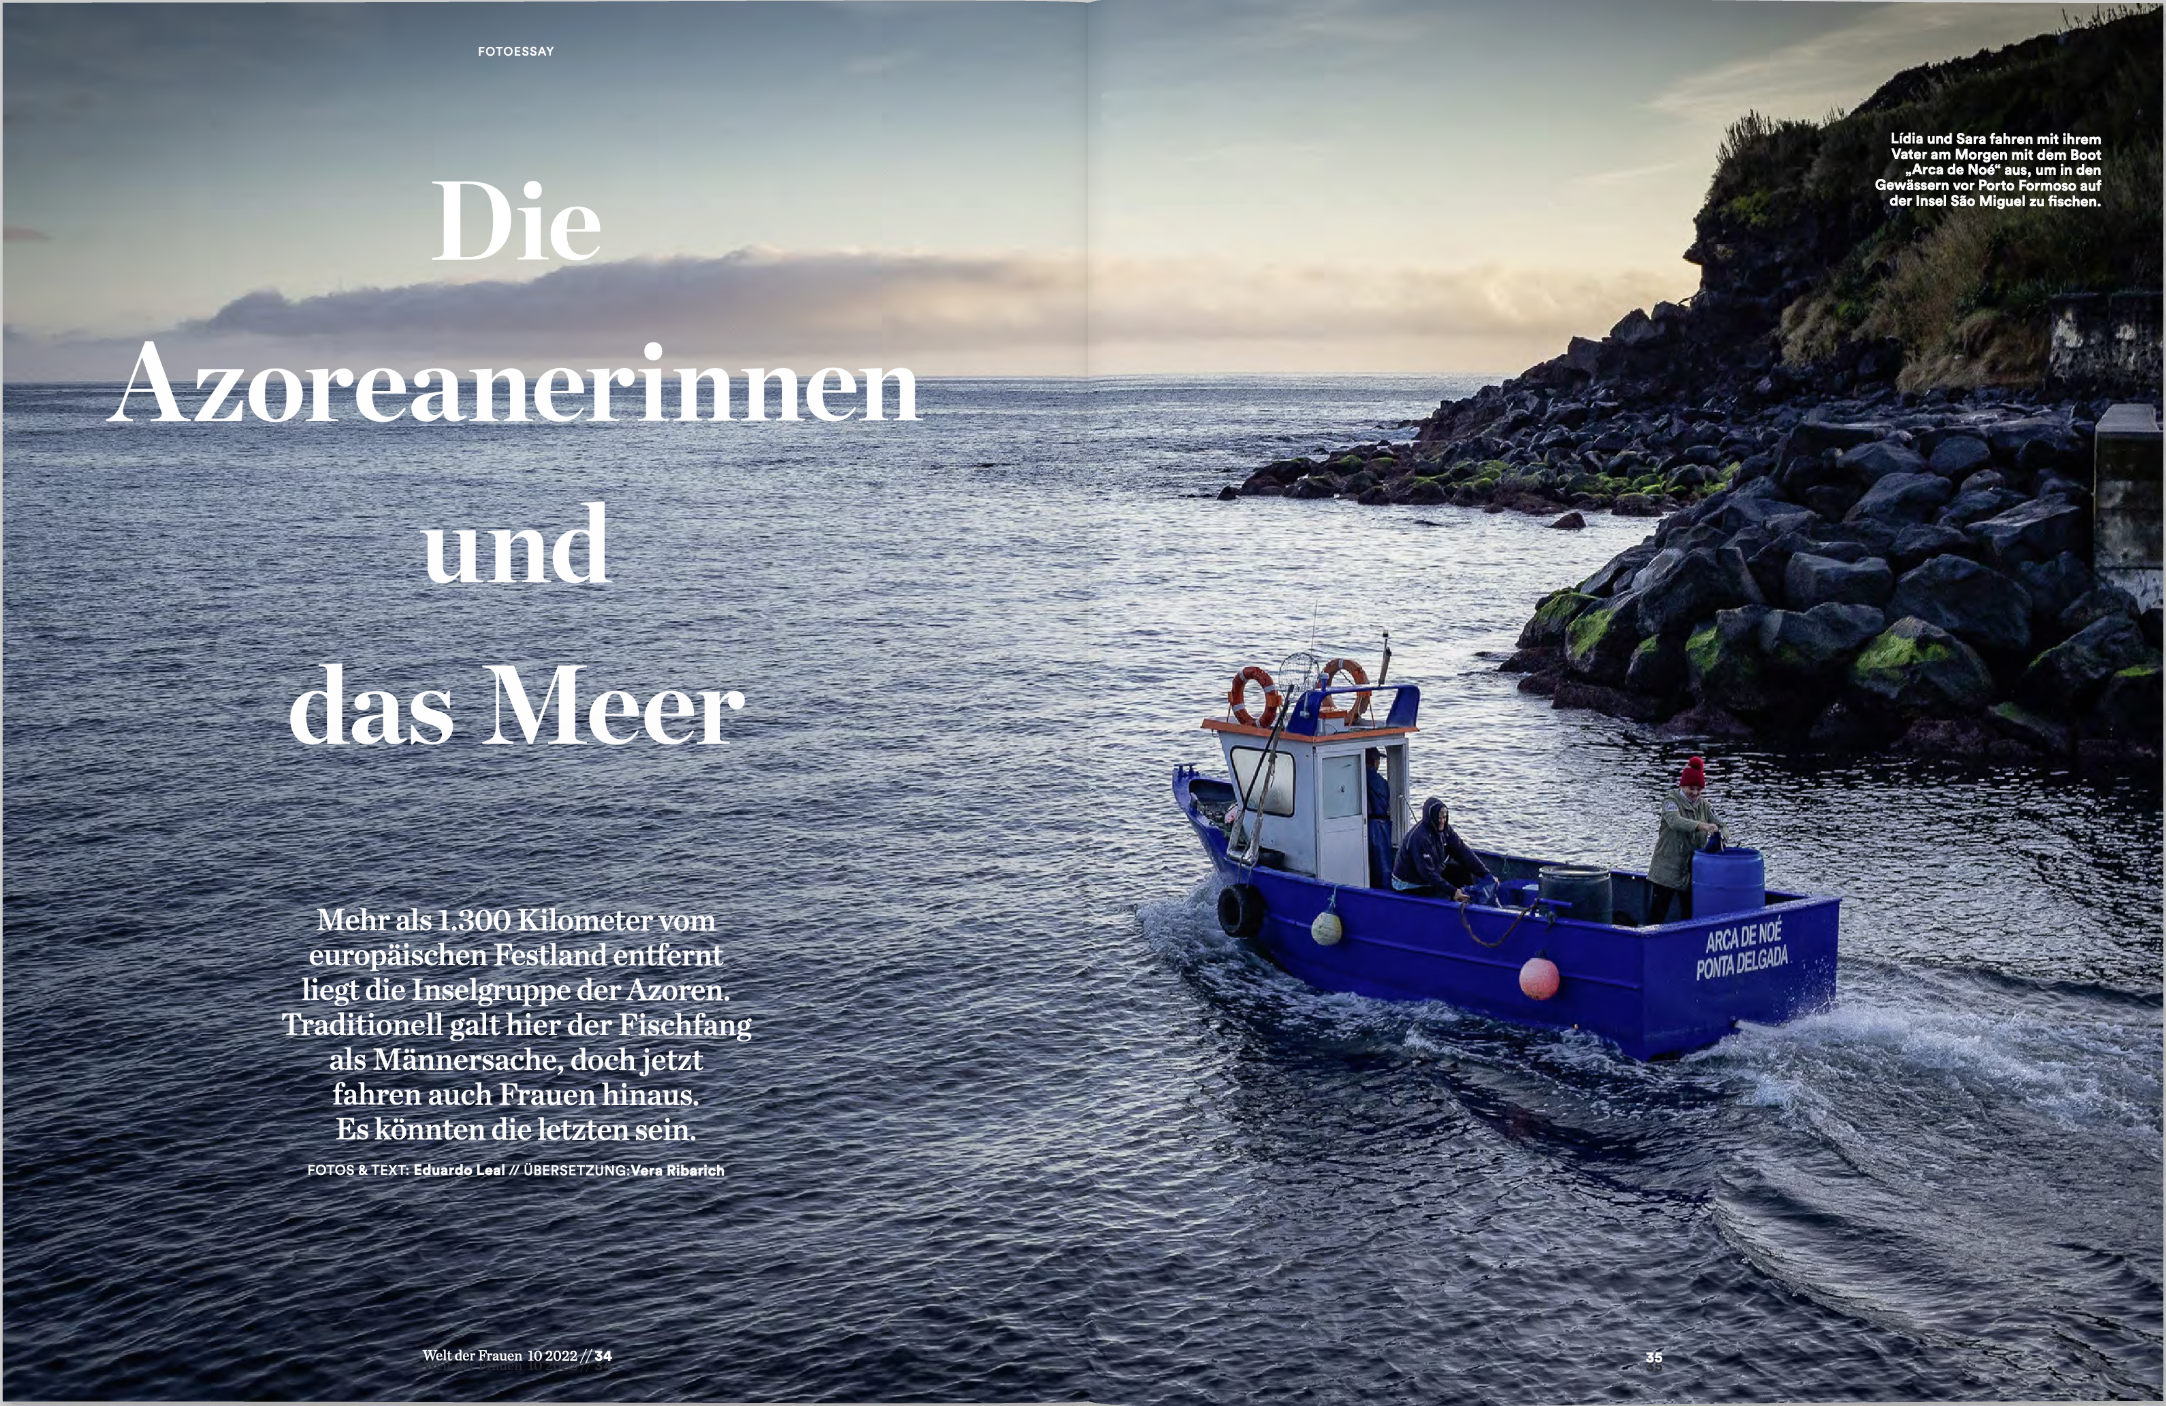 "Azoreans of the Sea" on last edition of Welt der Frauen